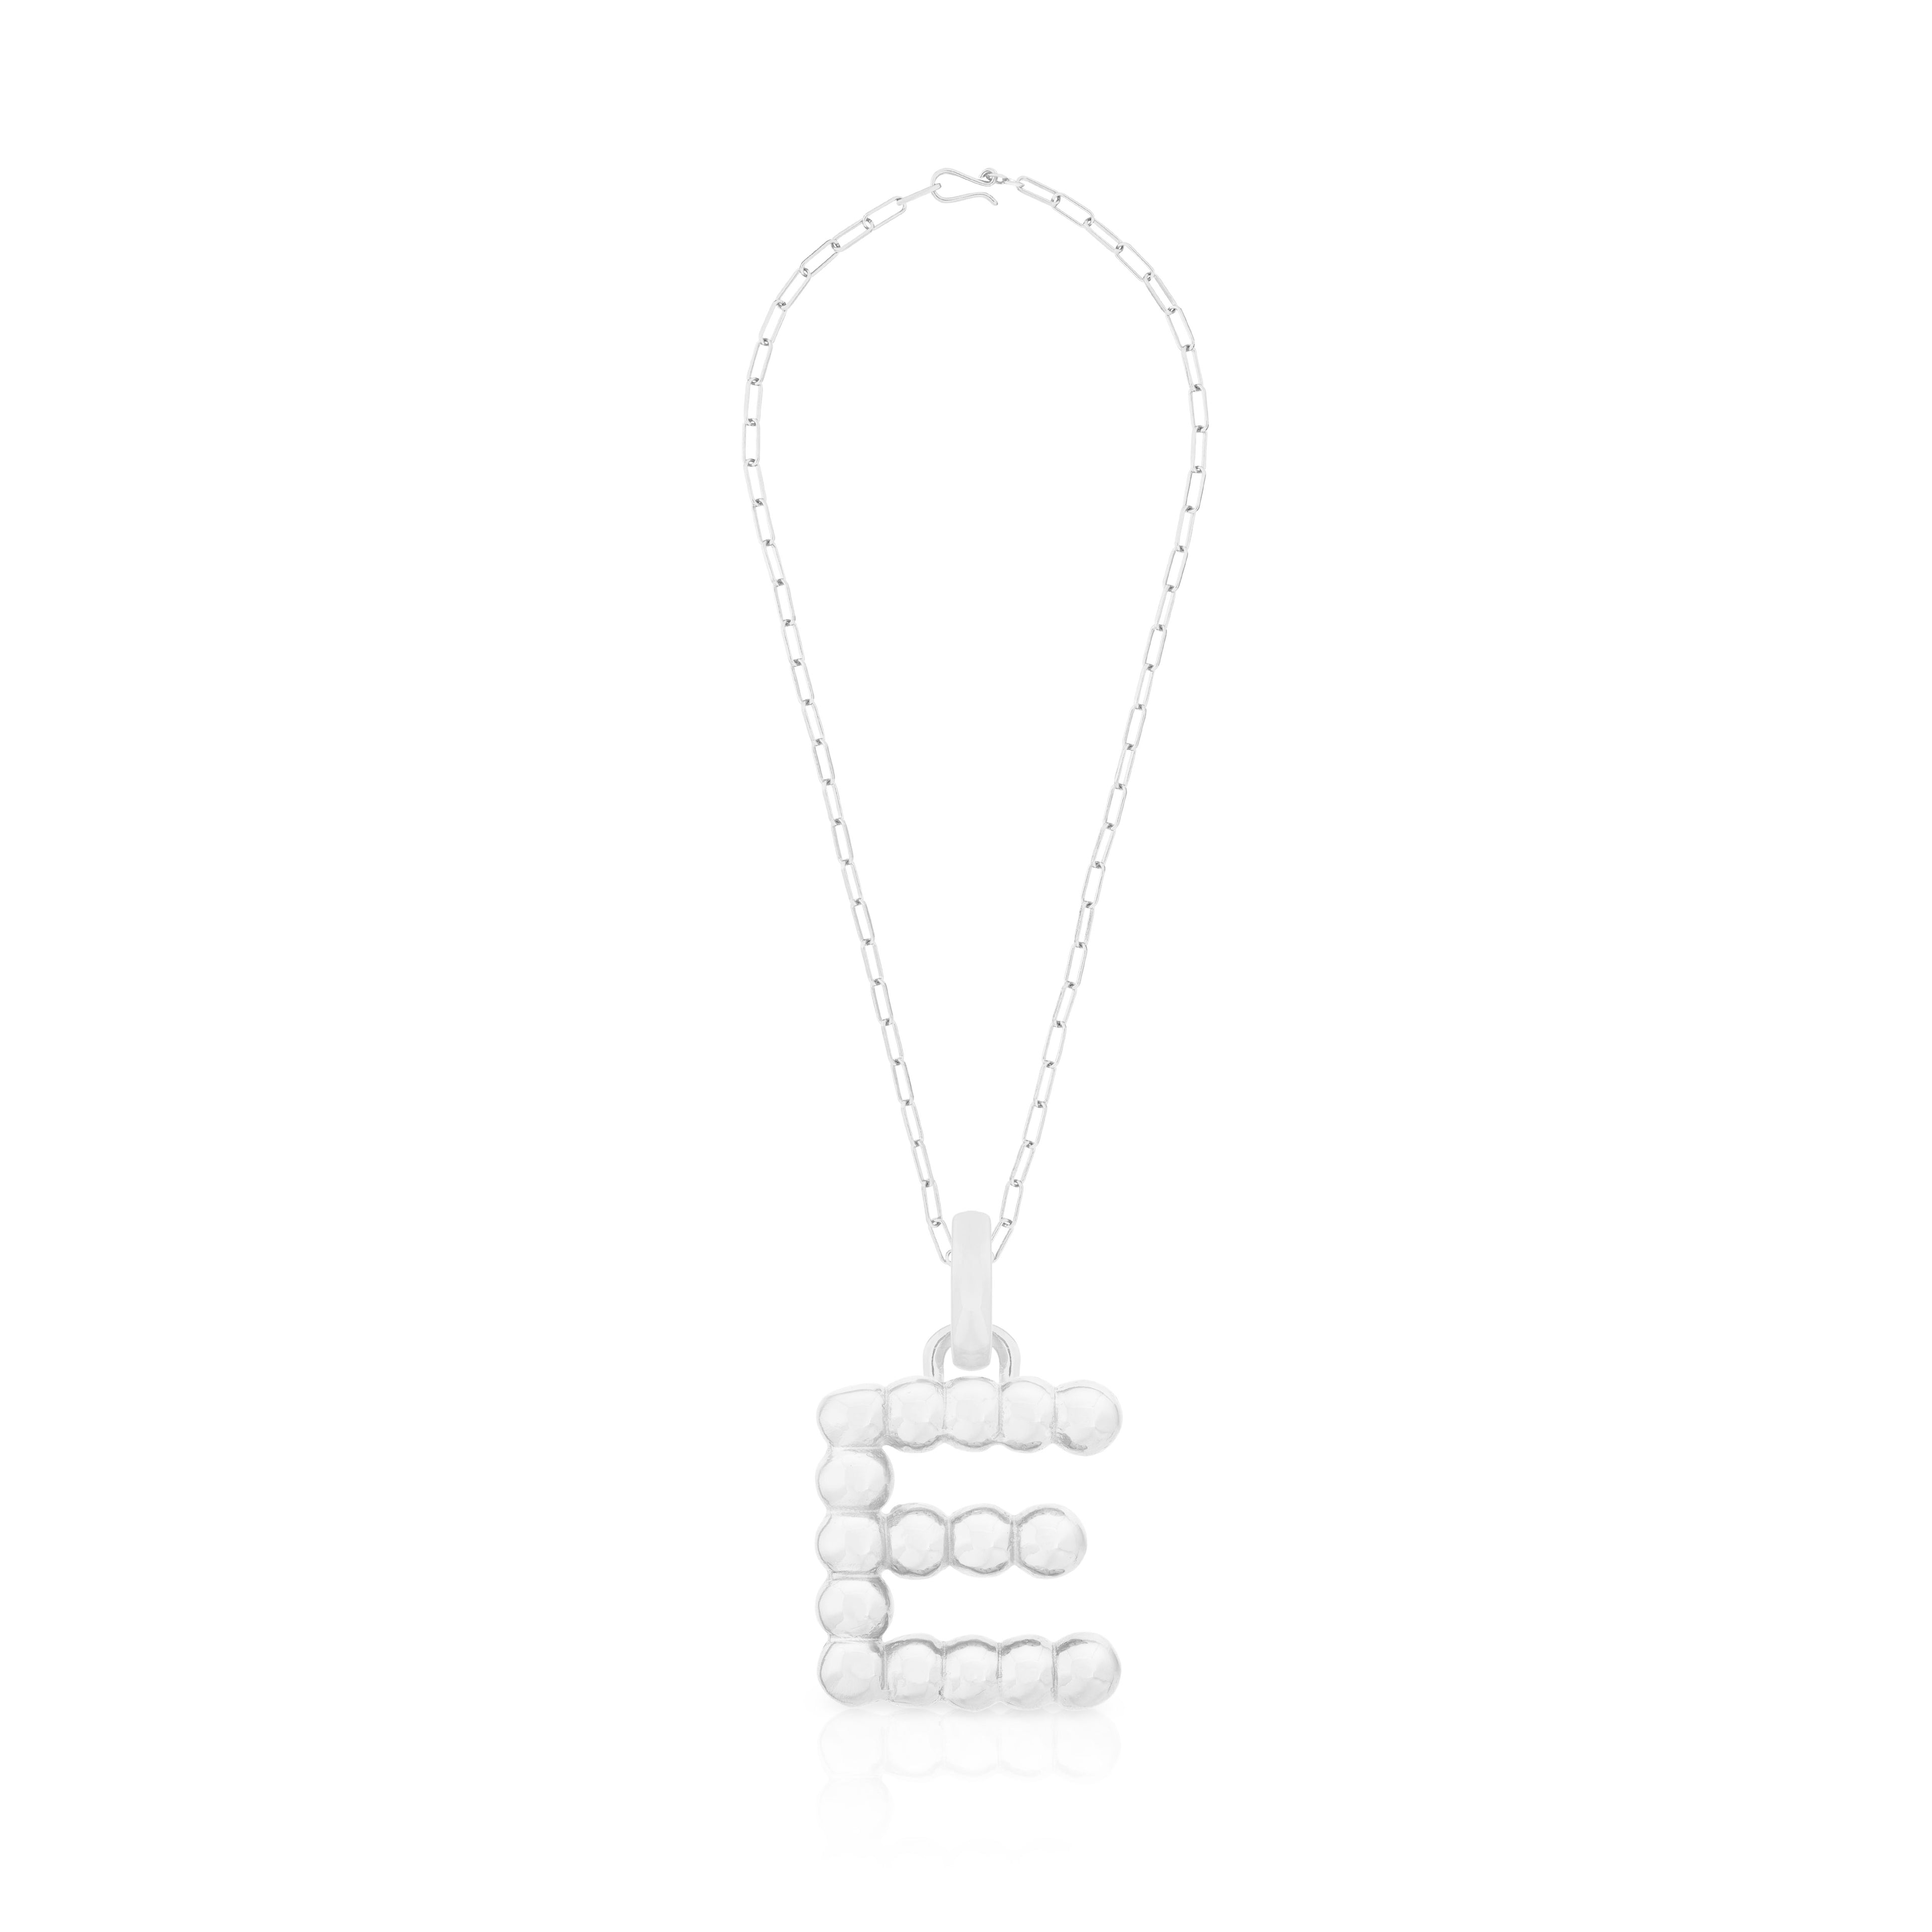 BOLD LETTER NECKLACE SILVER